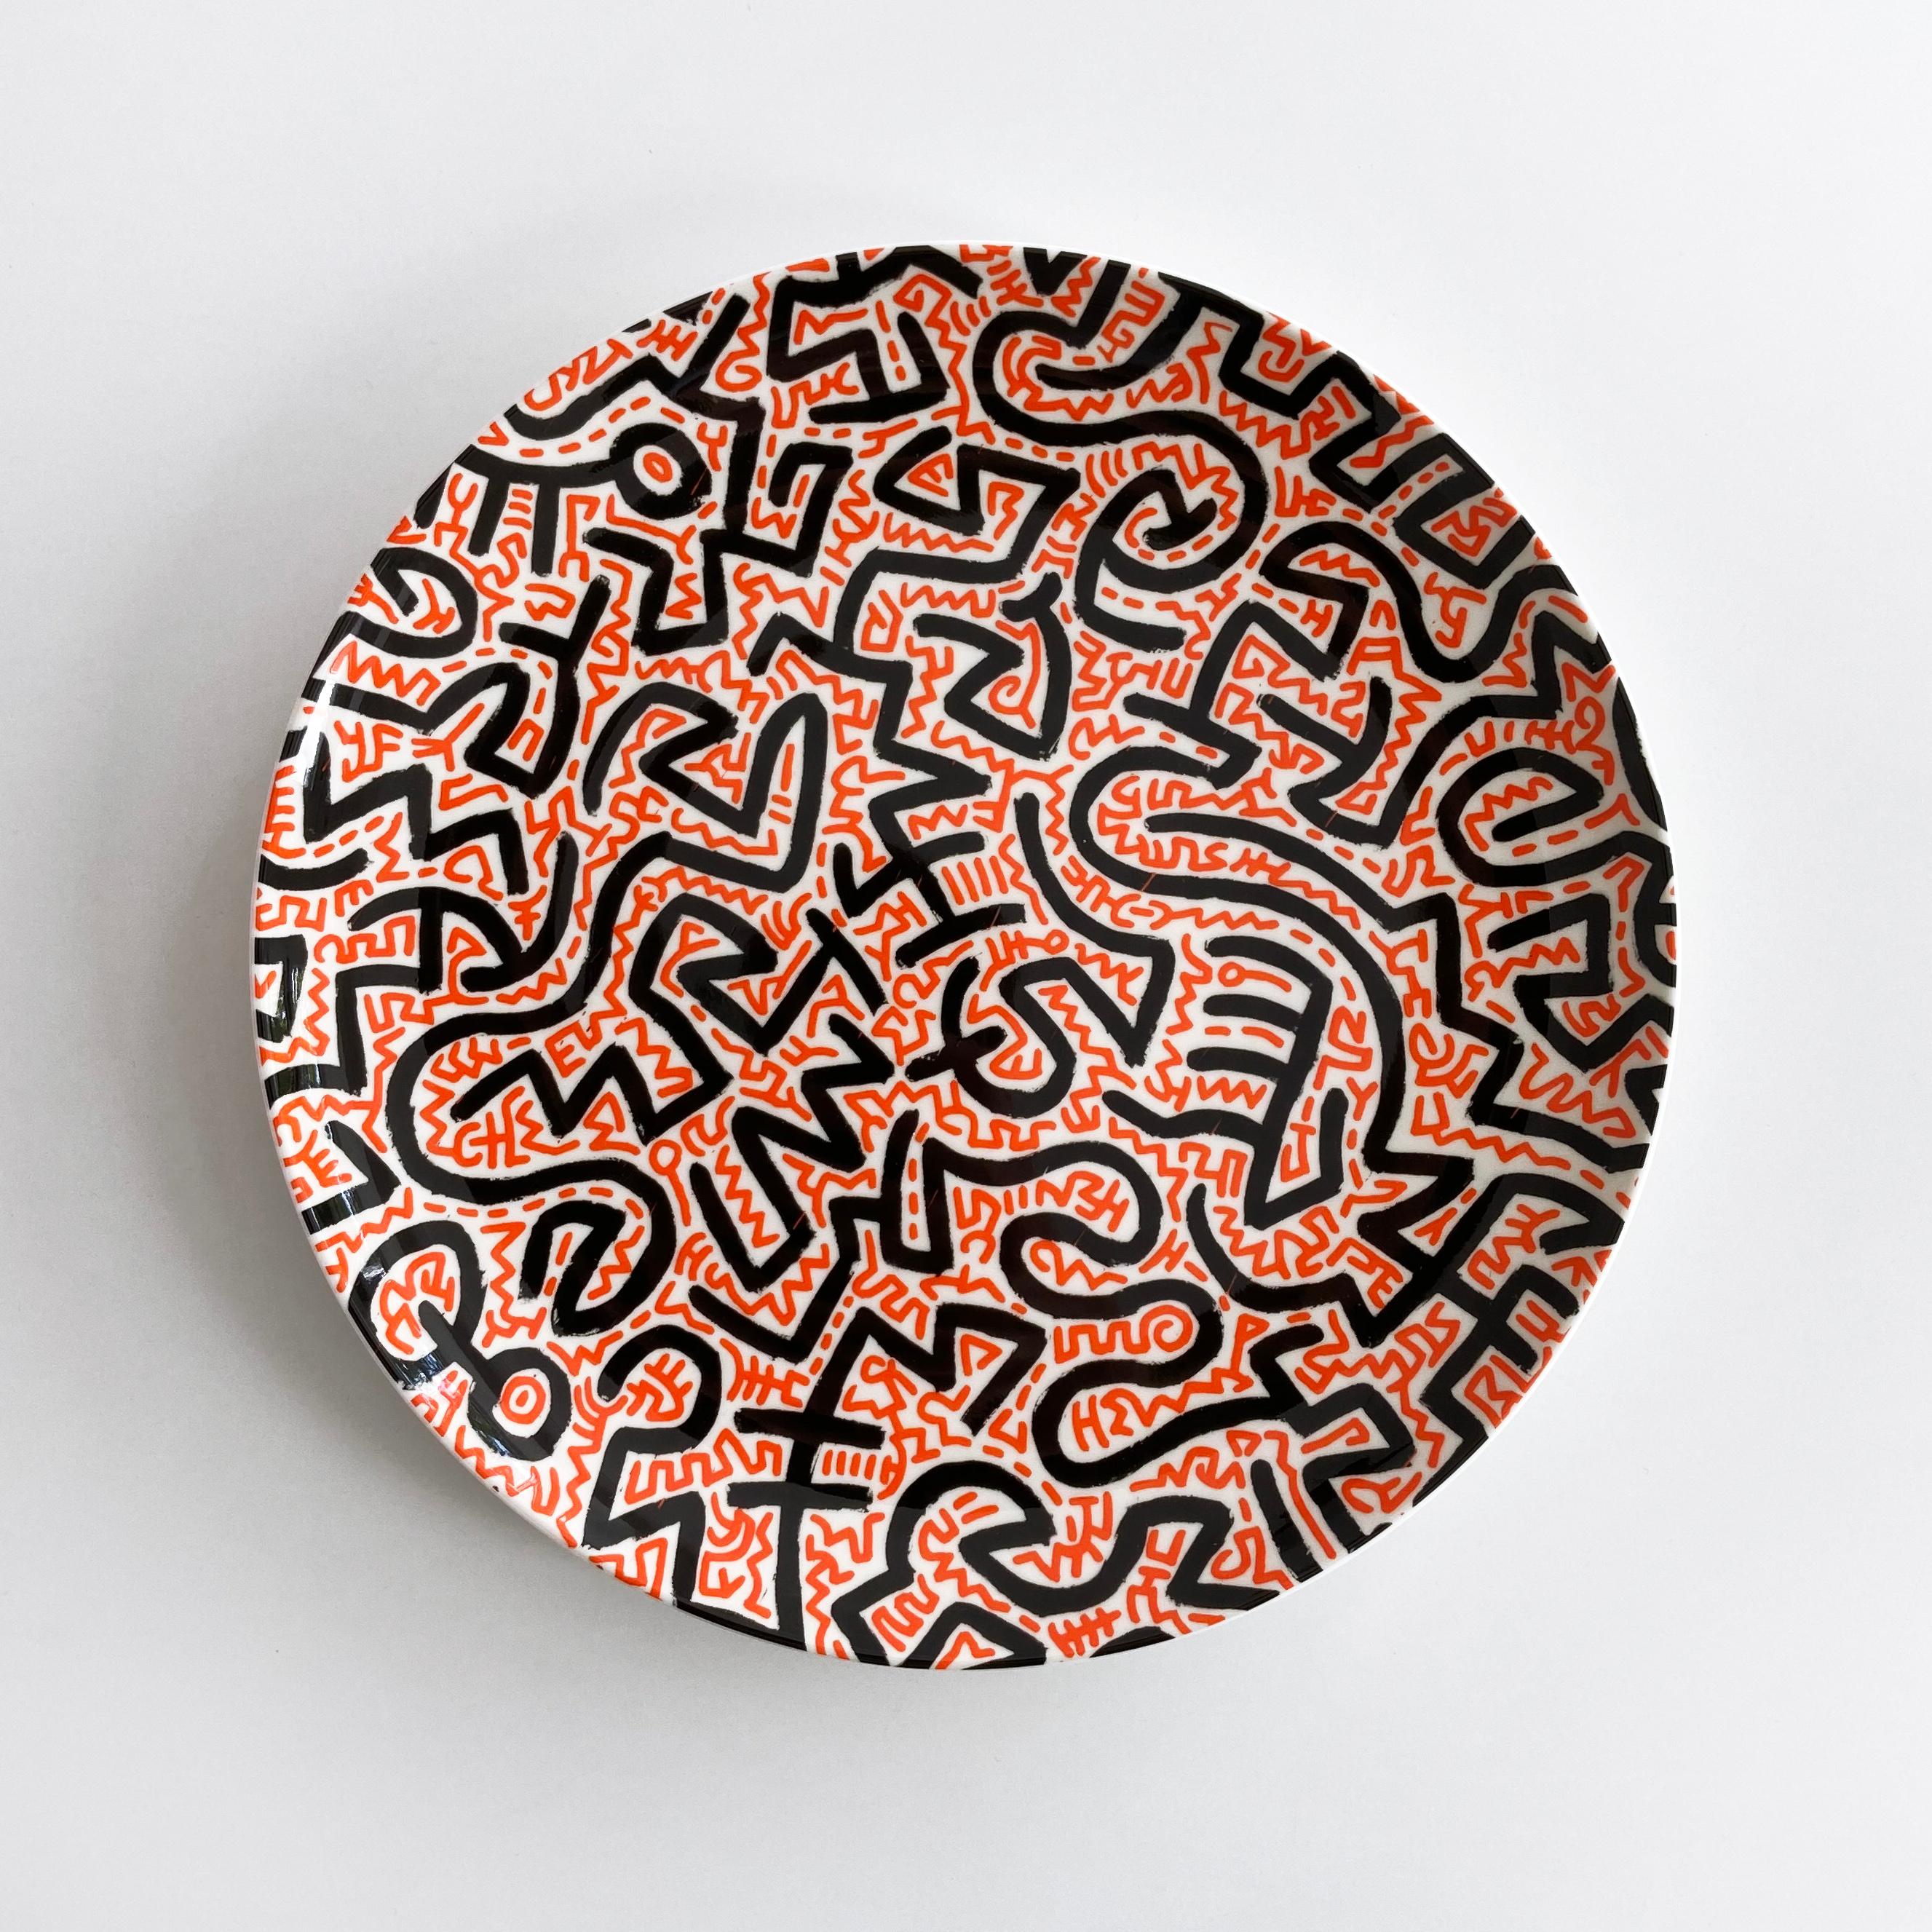 Keith Haring Abstract Print - Untitled, Plate for Coalition for the Homeless, Street Art, Contemporary Art